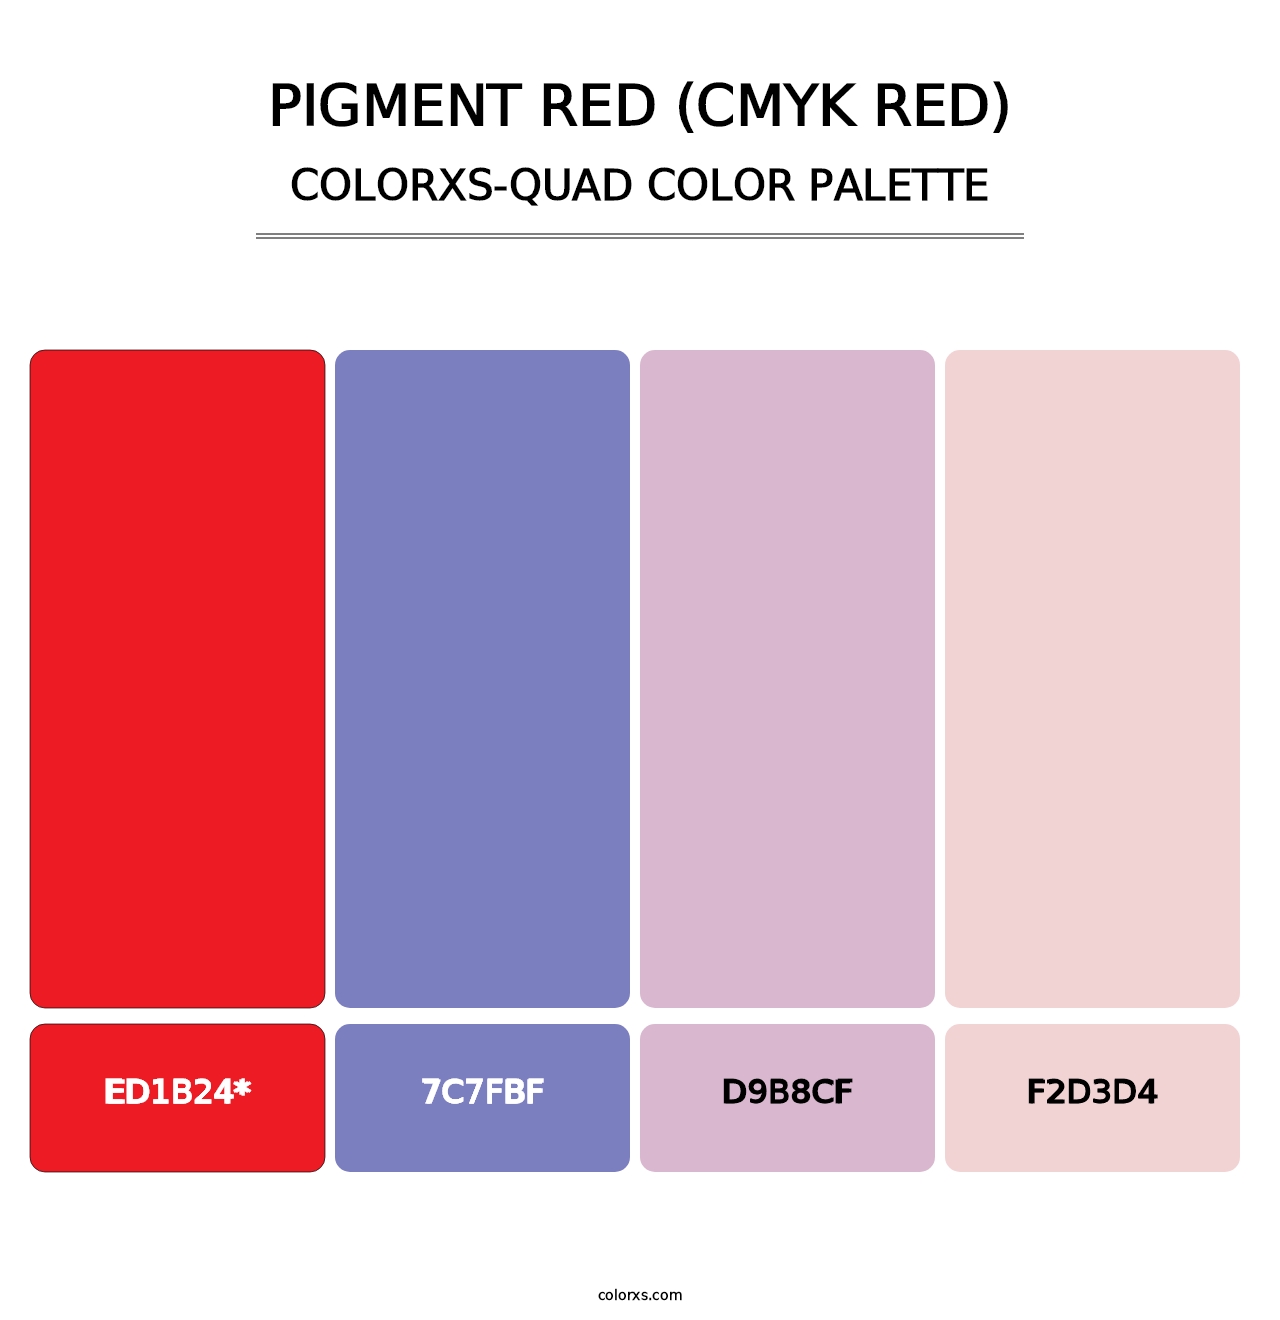 Pigment Red (CMYK Red) - Colorxs Quad Palette